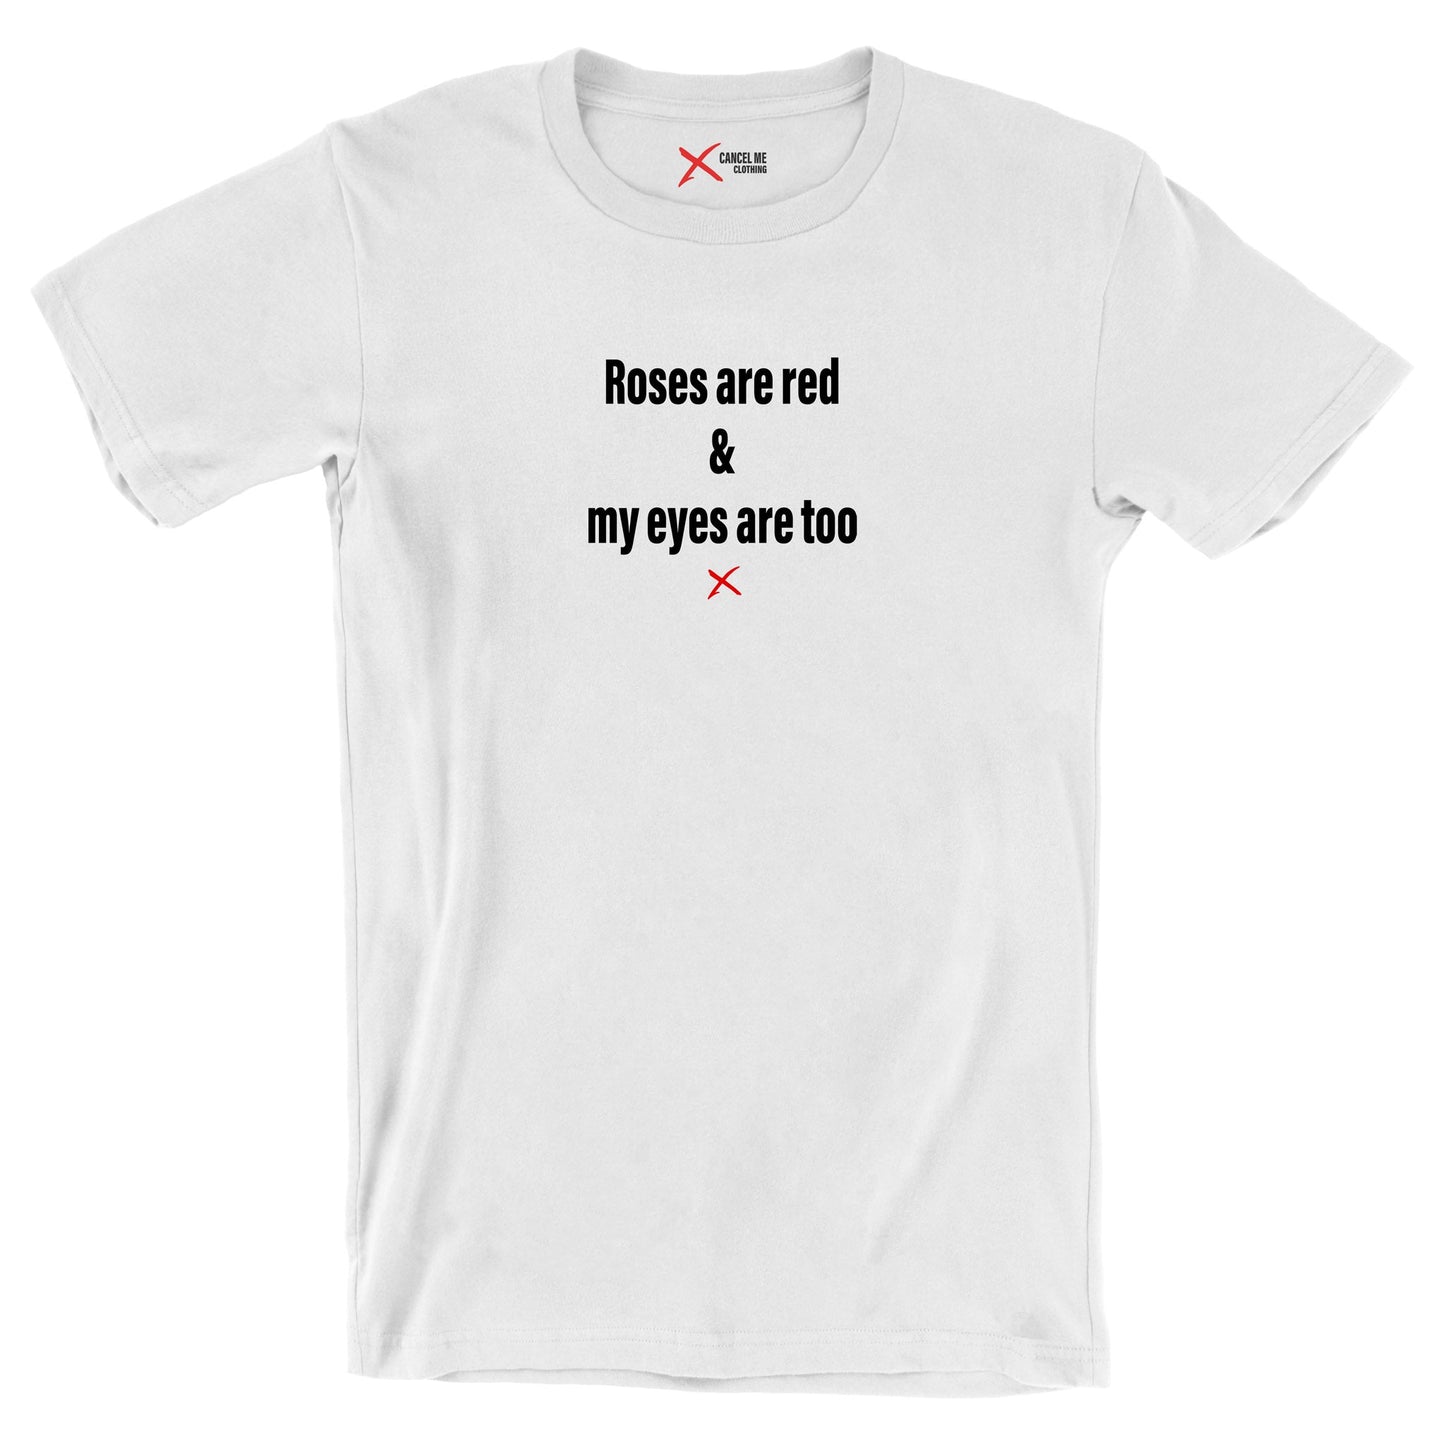 Roses are red & my eyes are too - Shirt